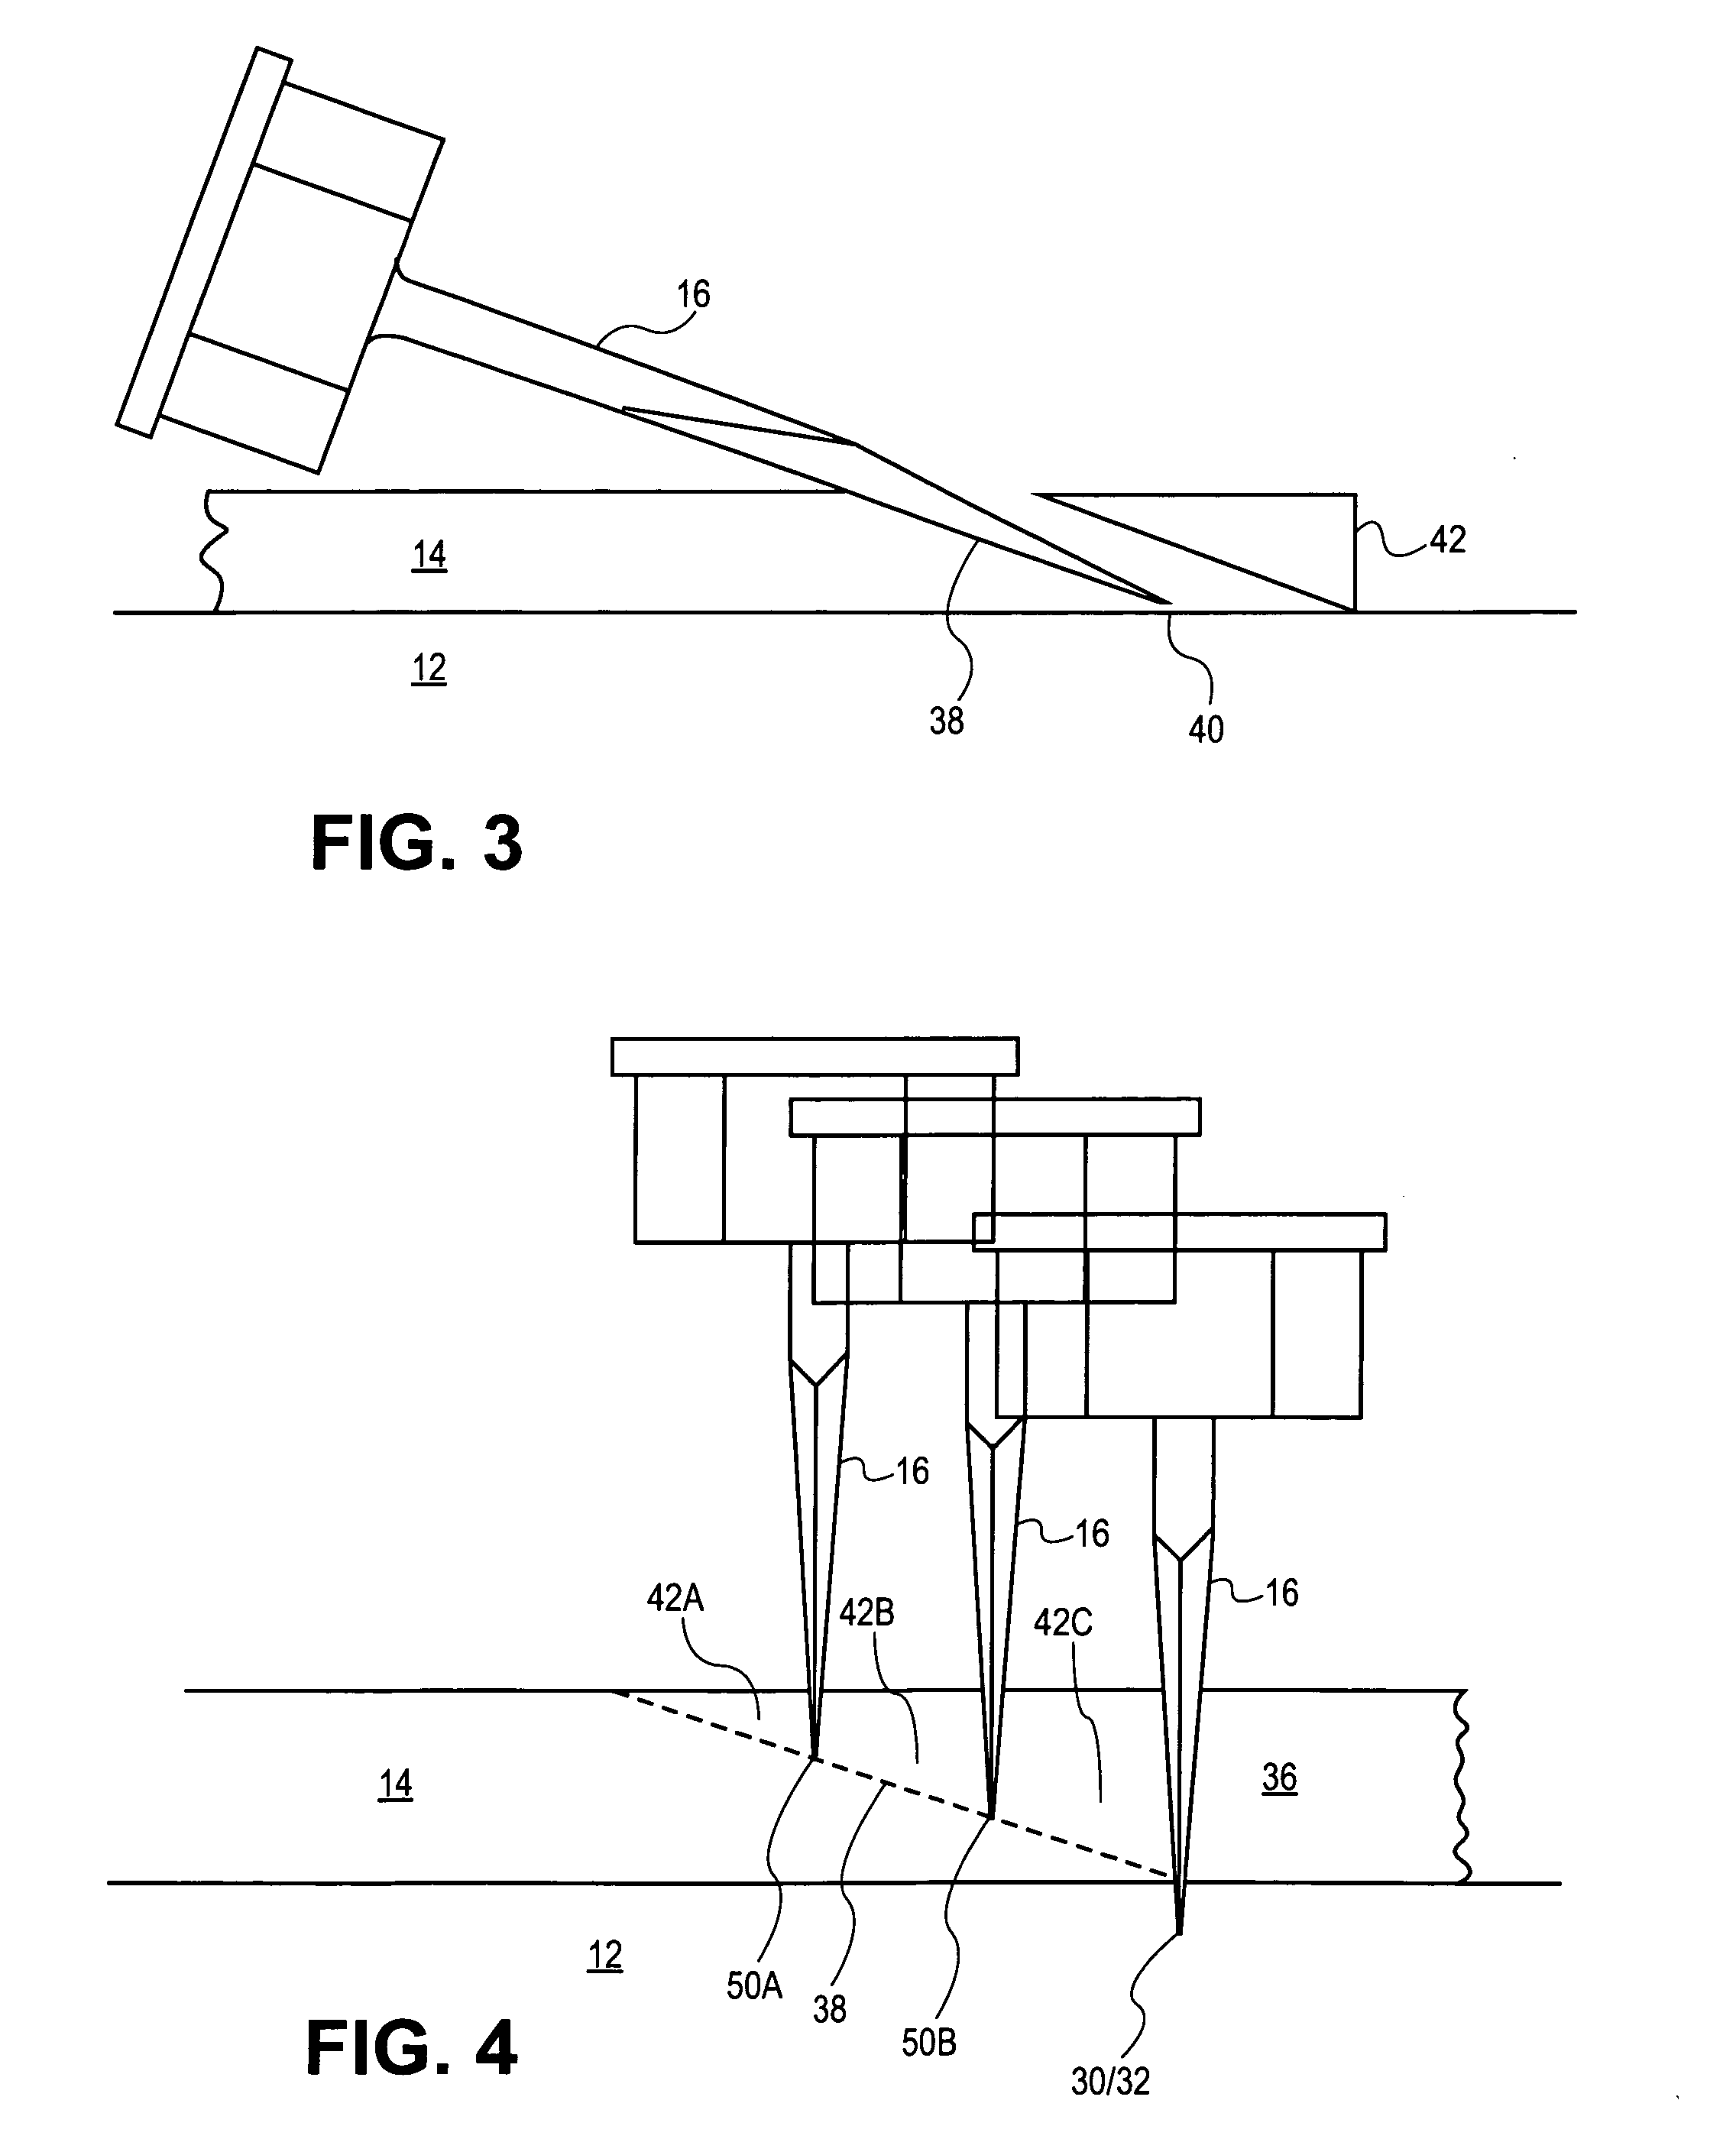 Cutting sequence for net trimming a composite layup at an oblique angle